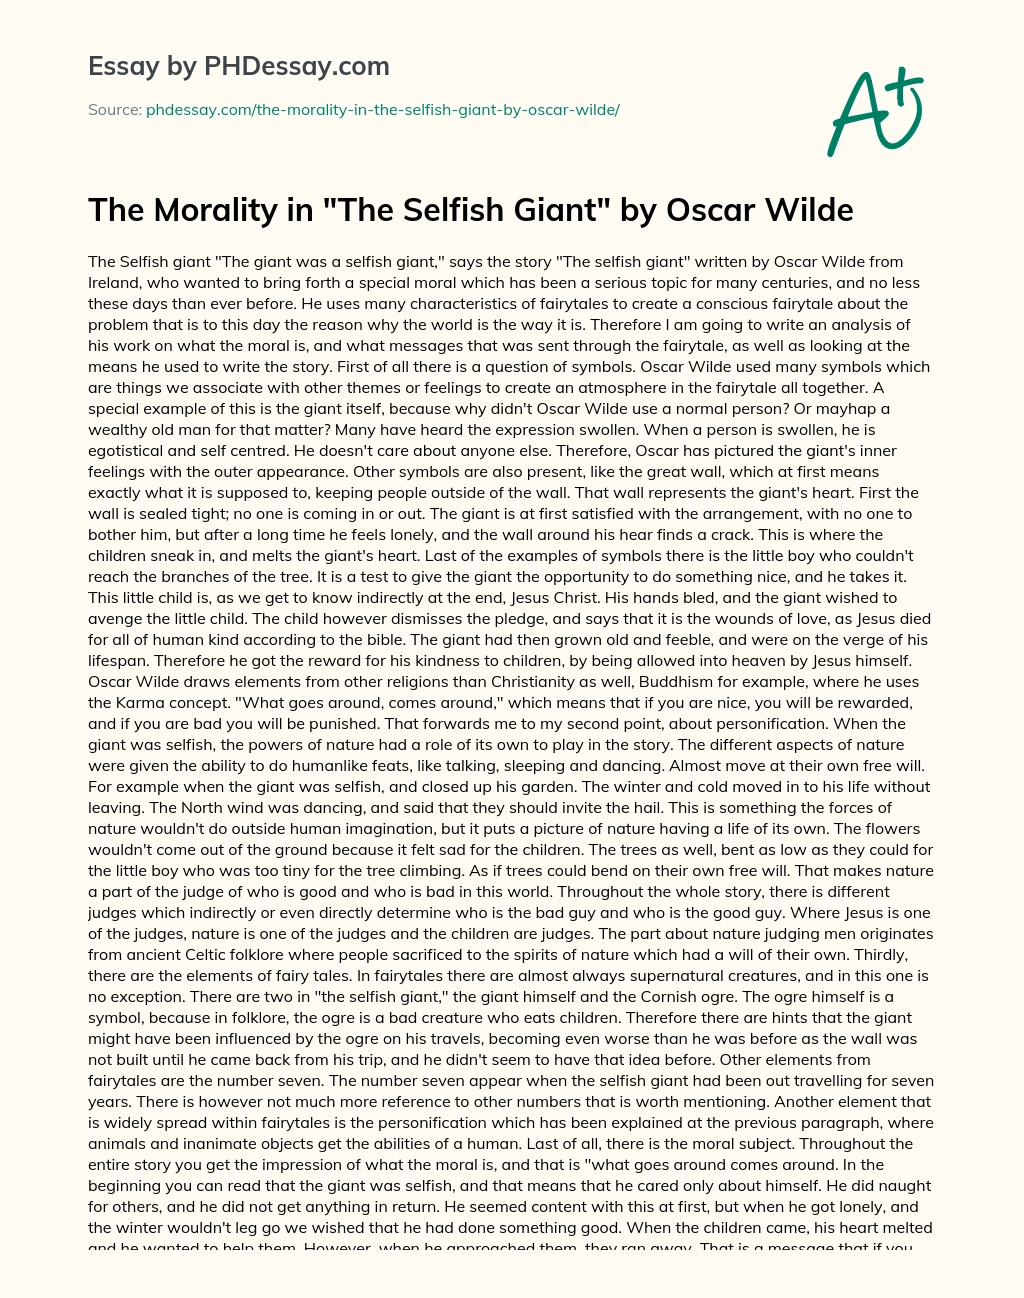 The Morality in The Selfish Giant by Oscar Wilde essay